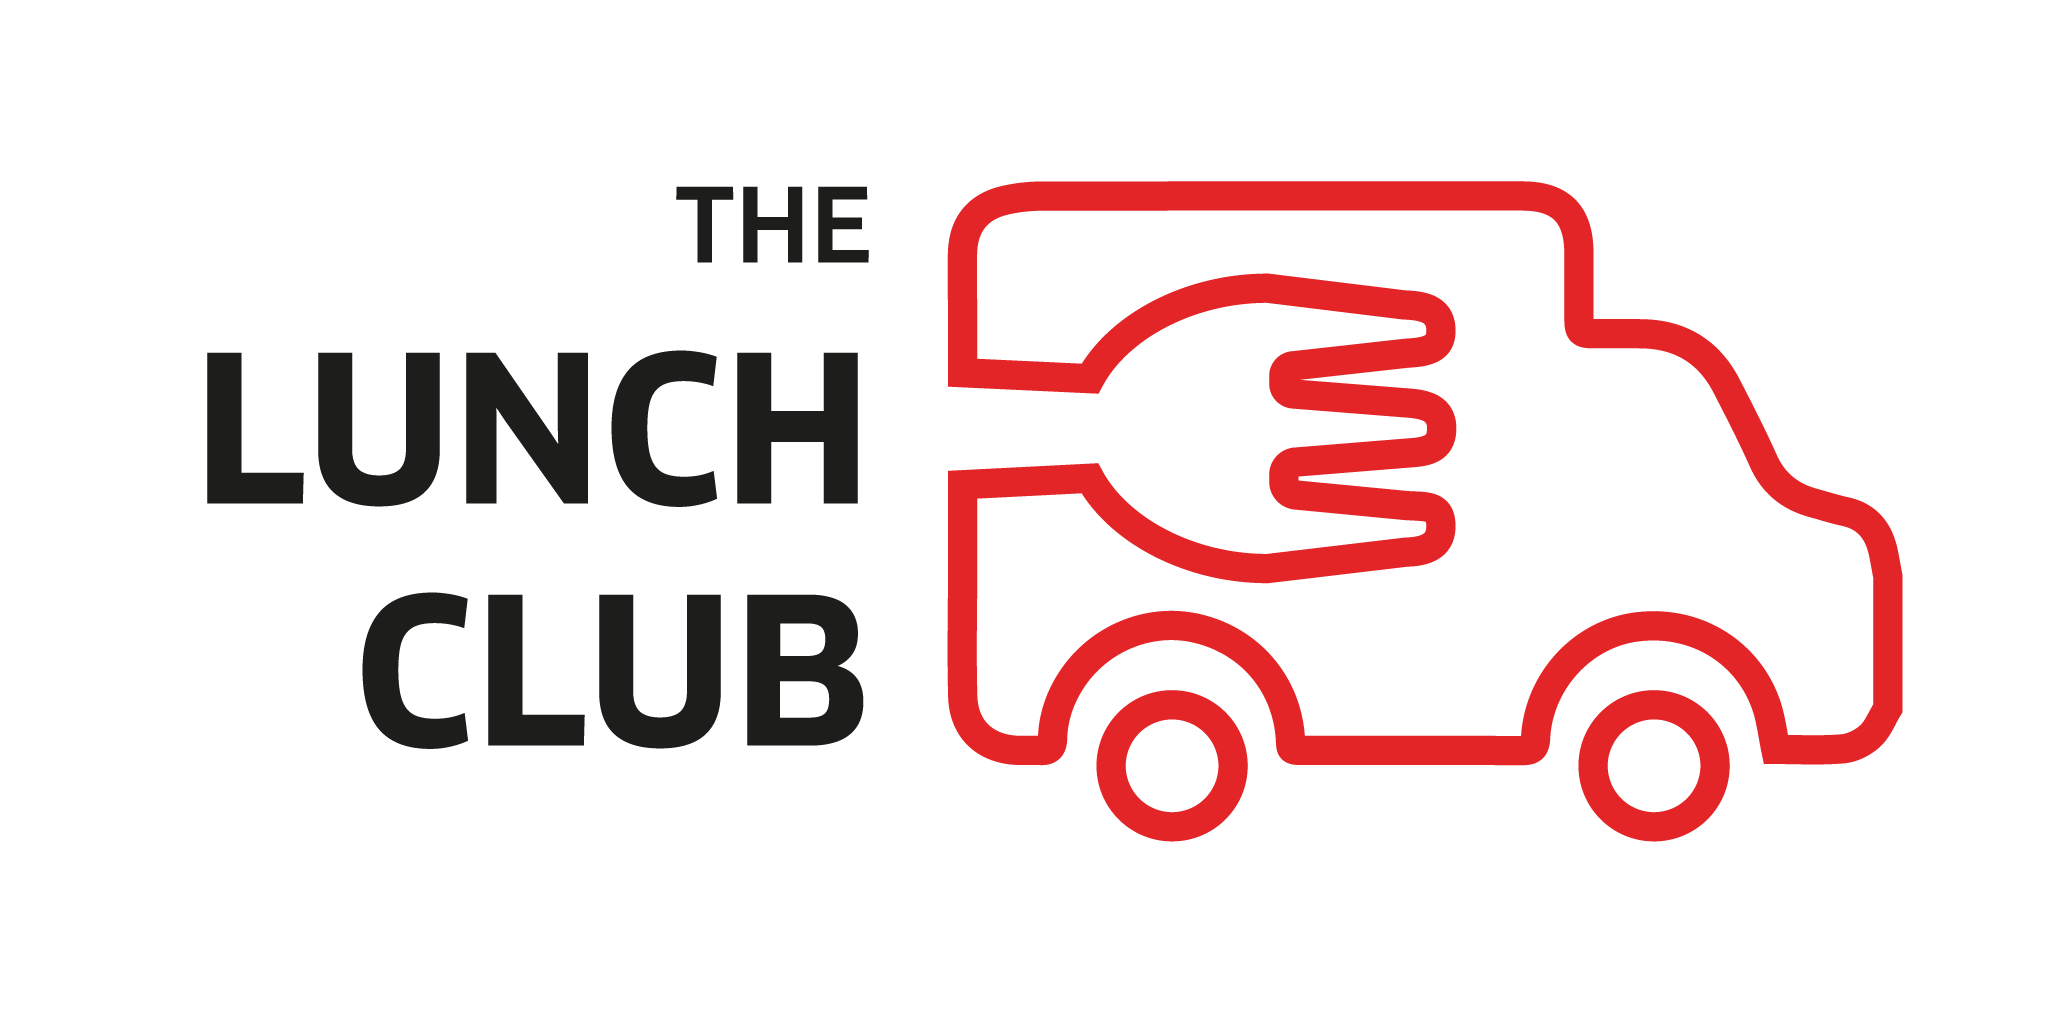 The Lunch Club